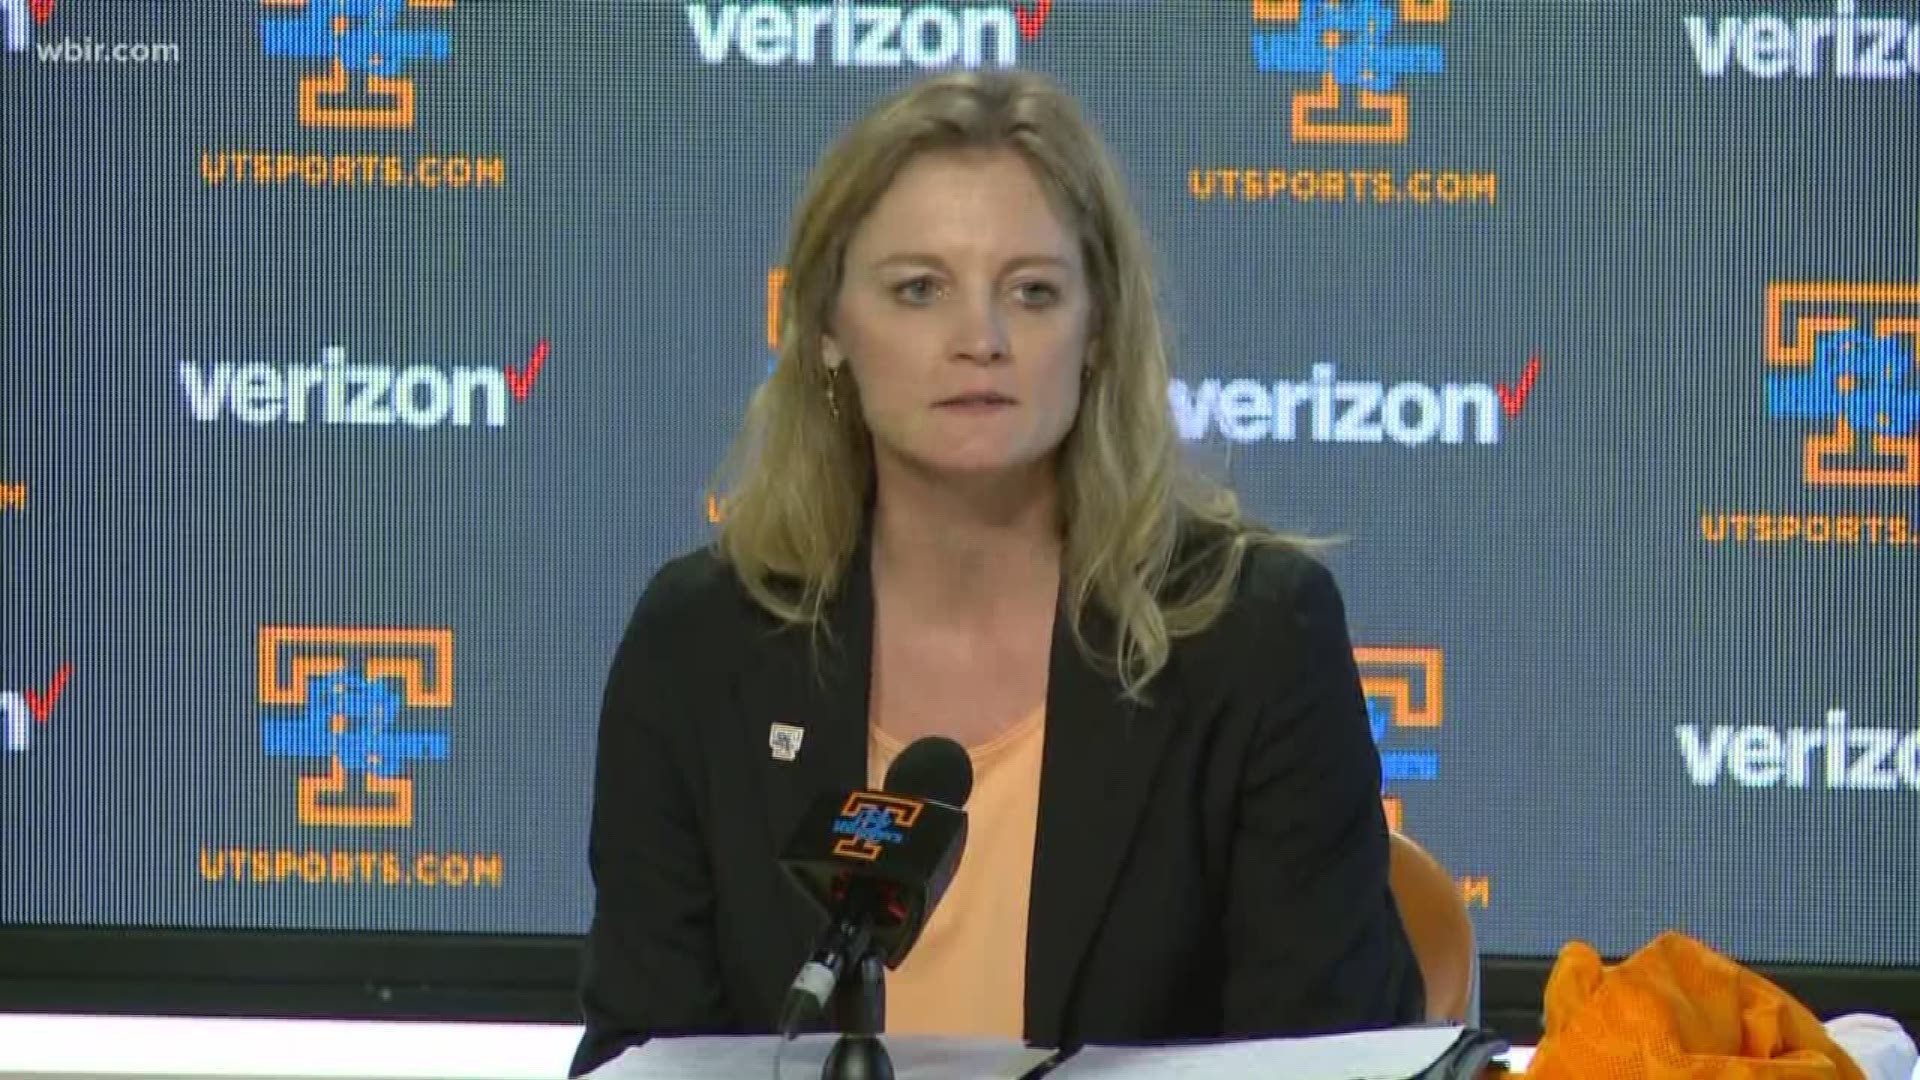 Lady Vol legend Kellie Jolly Harper was formally introduced to the public as the new head coach of The Lady Vols. April 10, 2019-4pm